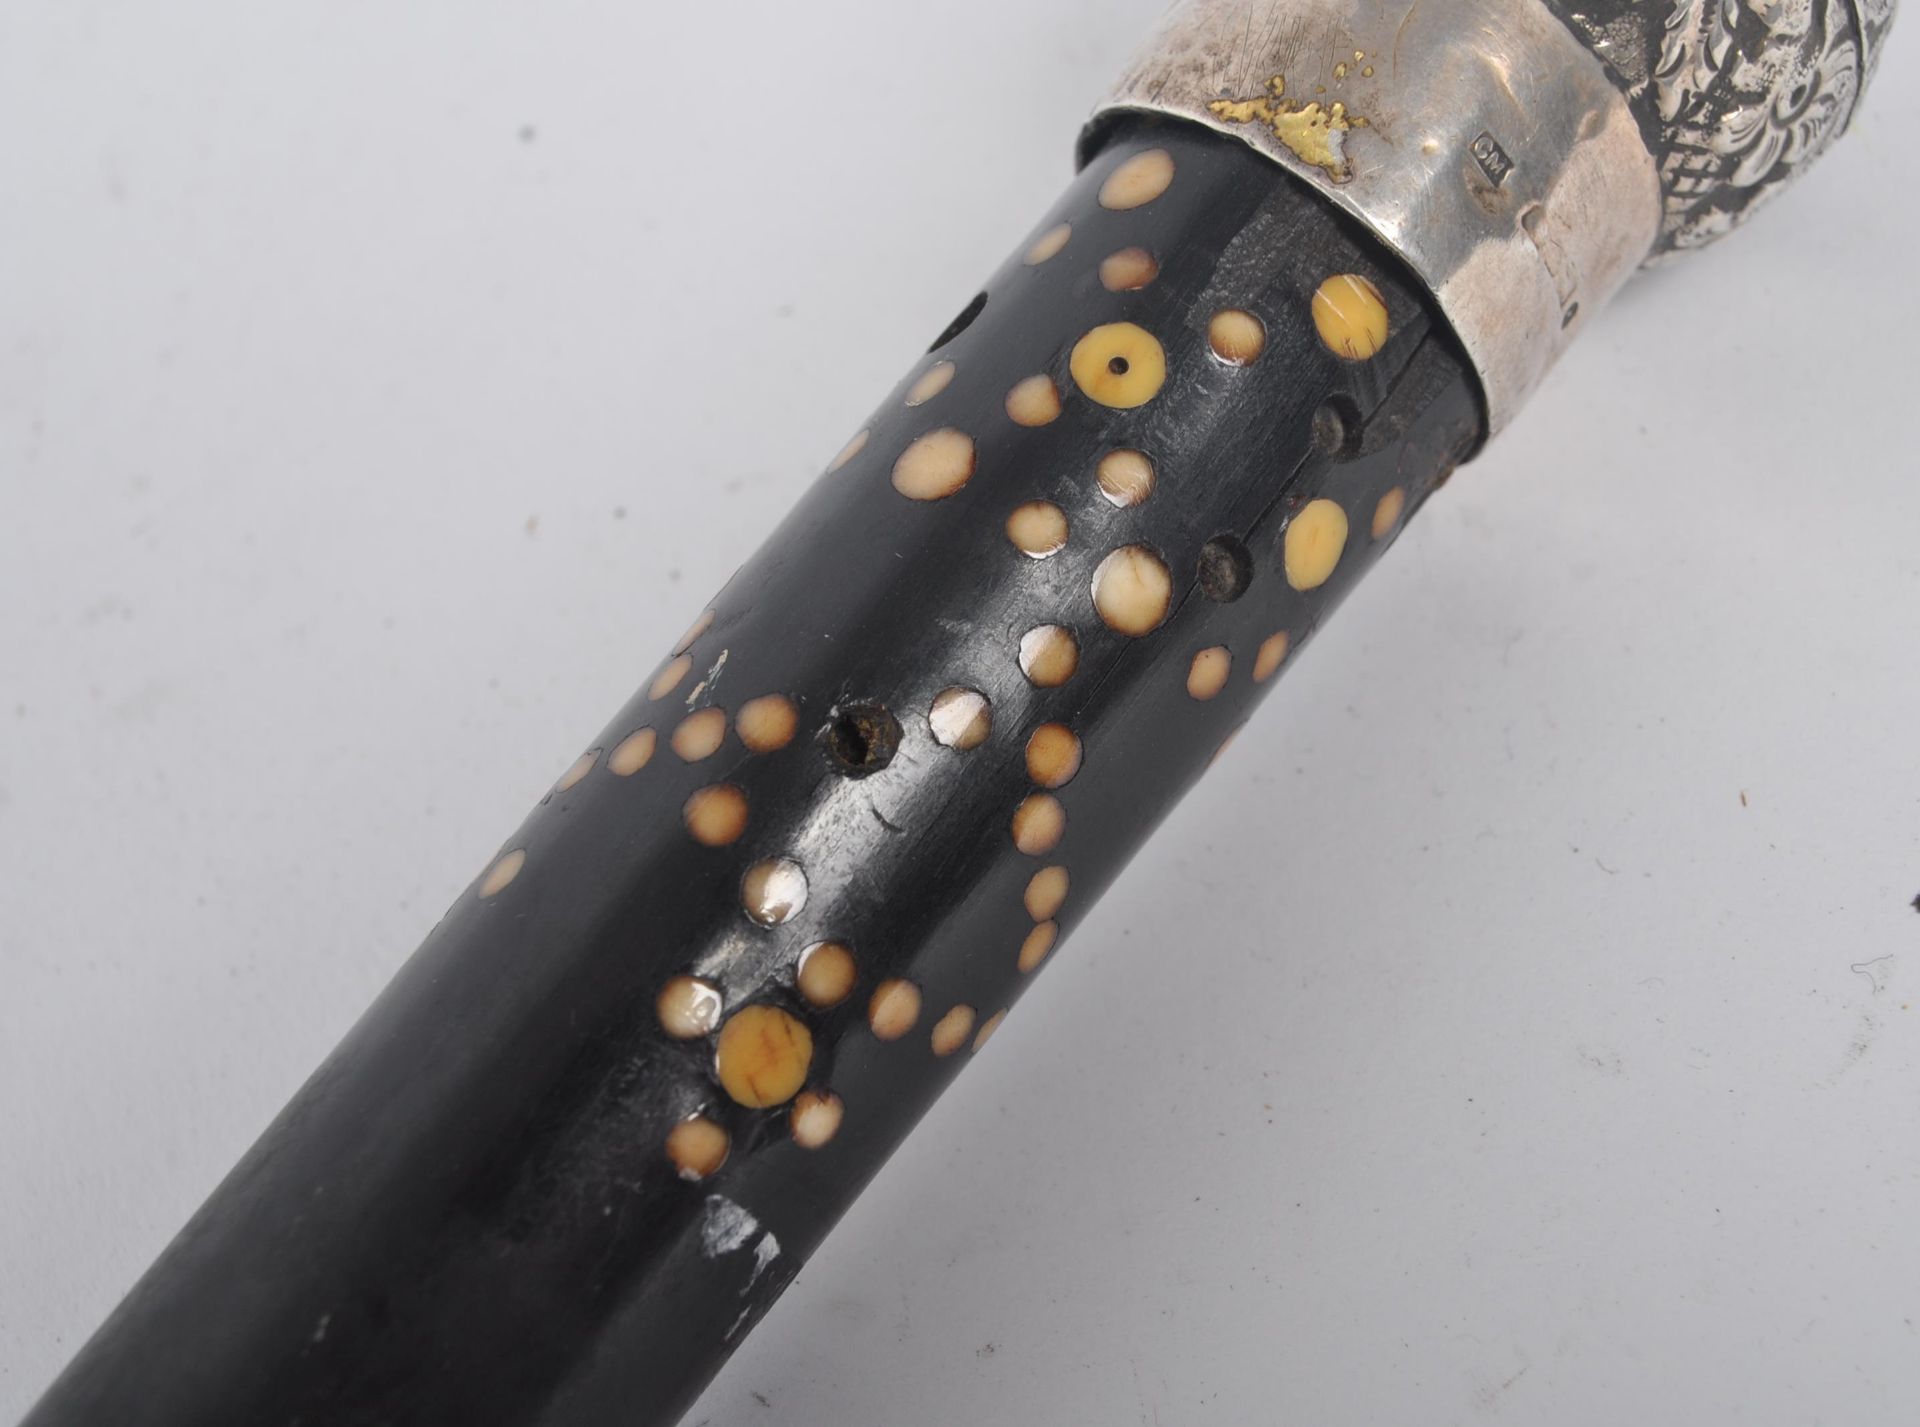 SILVER TOPPED DECORATIVE CANE WITH SPOTTED BONE INLAY - Image 3 of 7